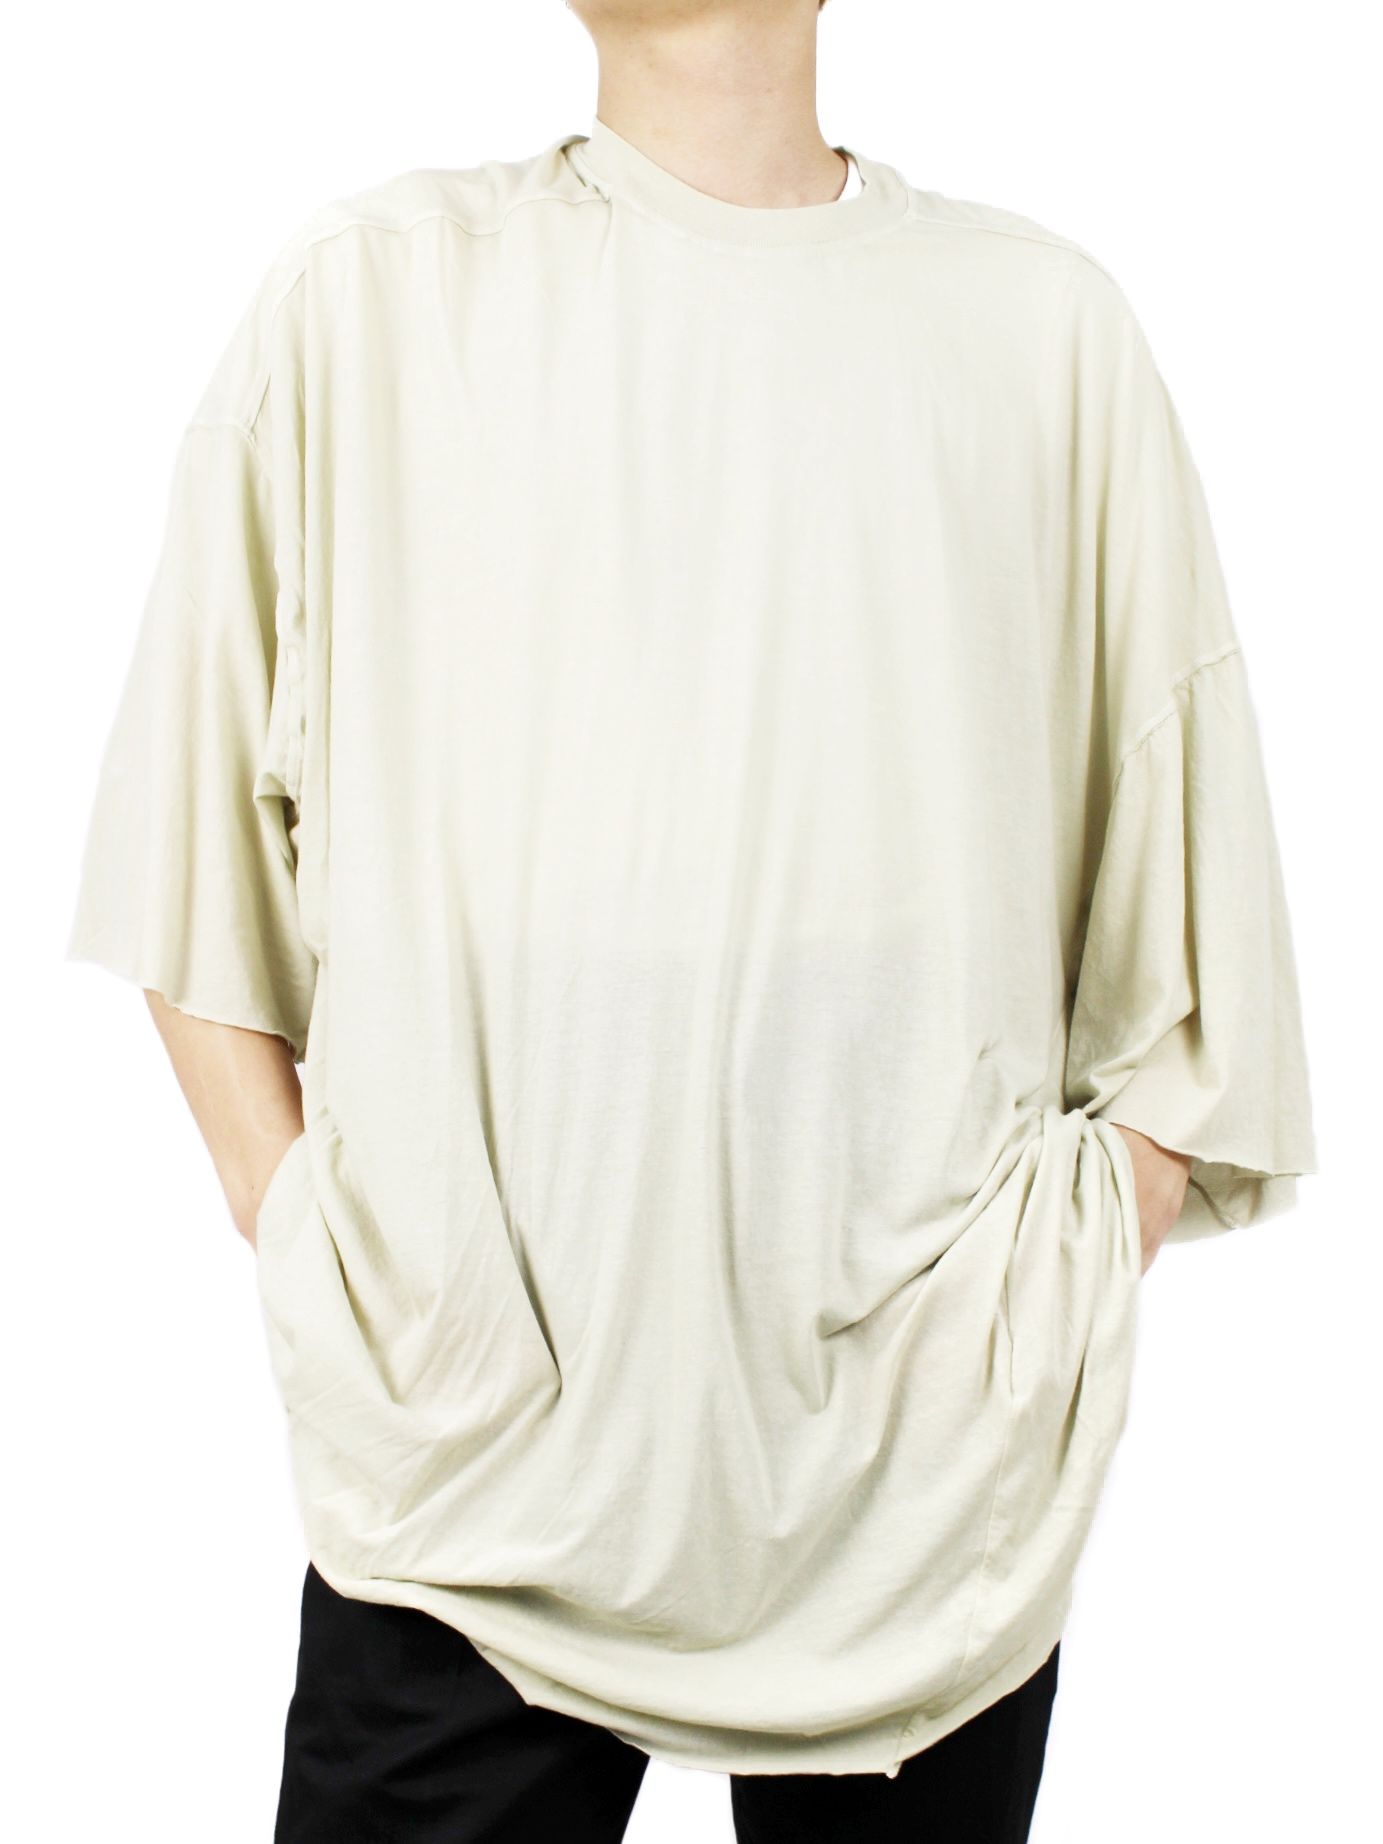 RICK OWENS - 【23SS】半袖 トミー スーパービッグ Tシャツ / TOMMY T ...